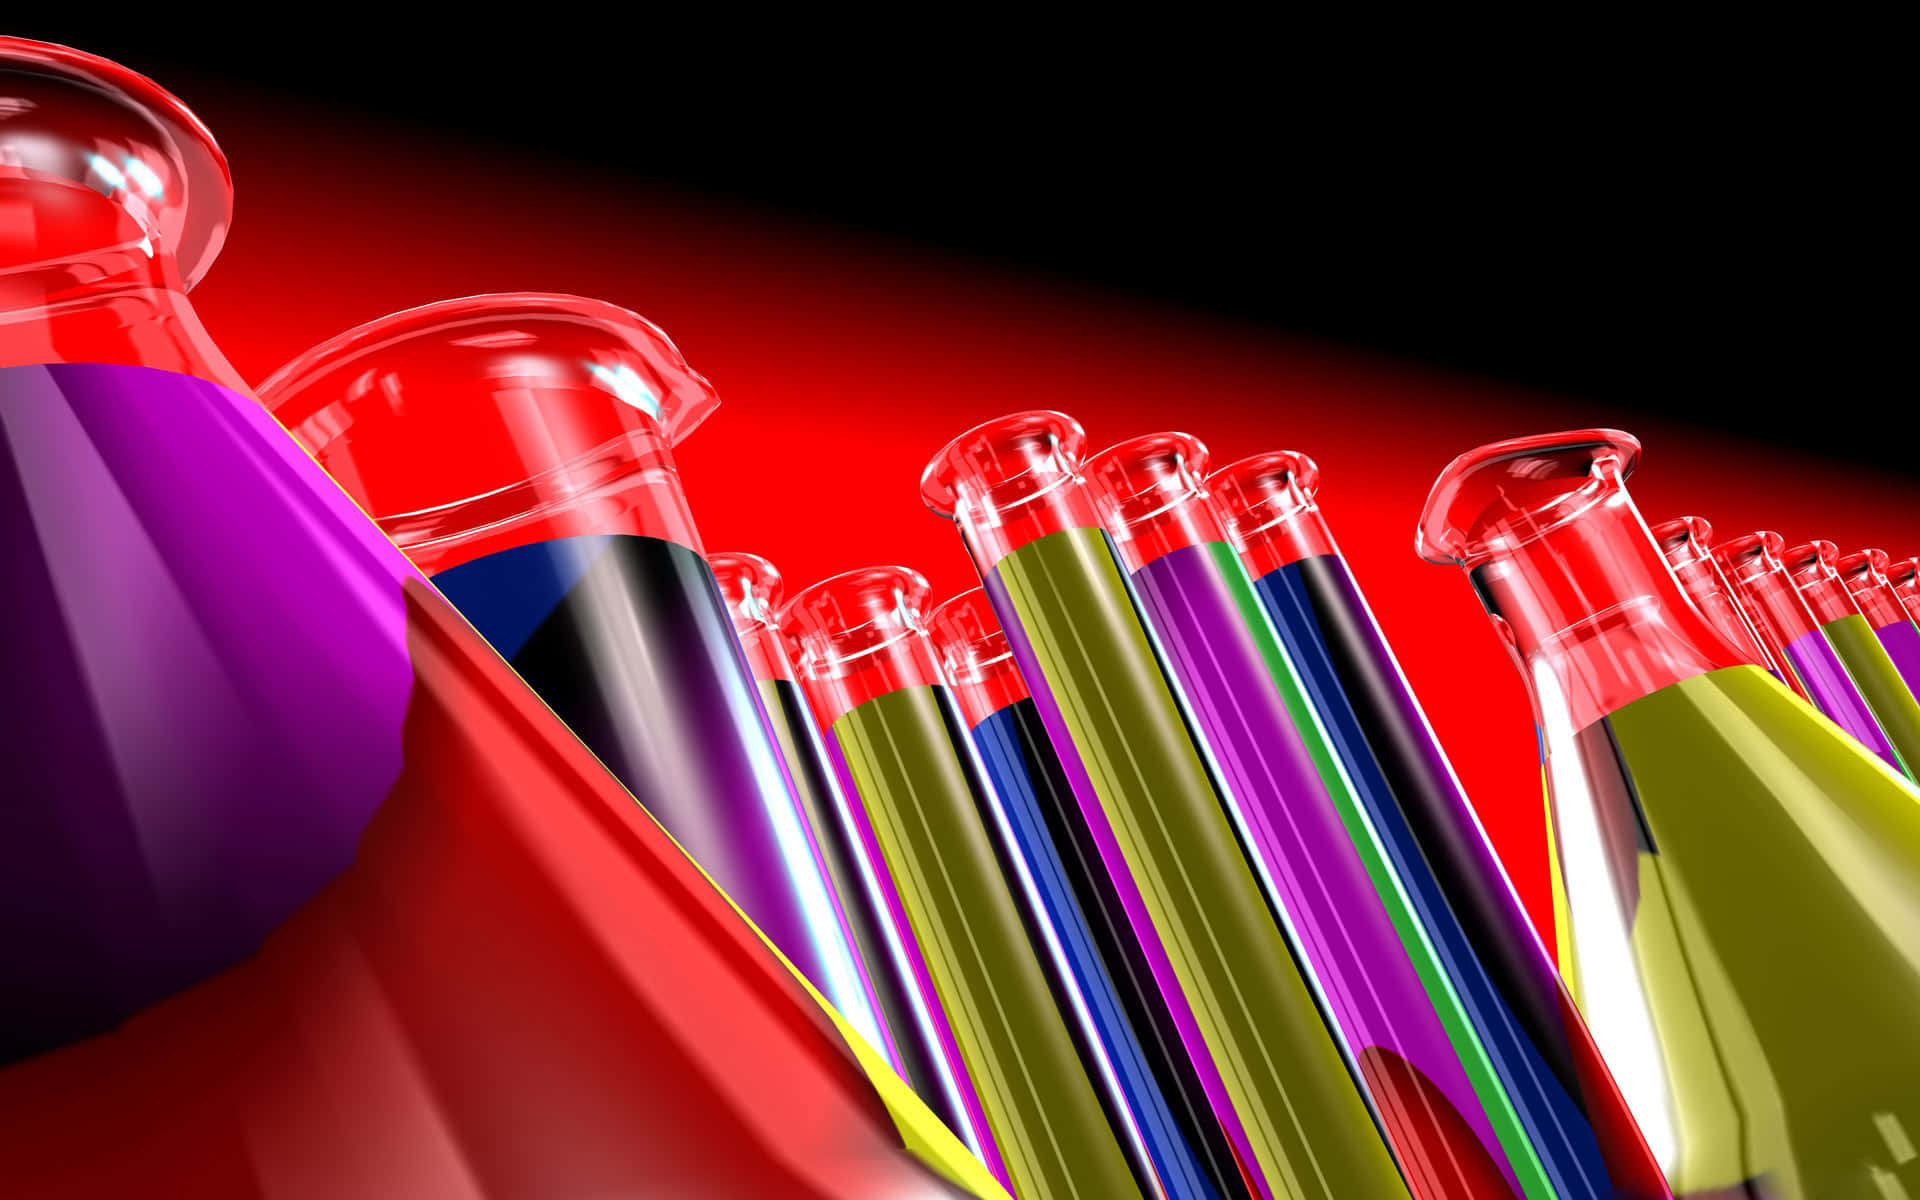 A Group Of Colorful Test Tubes On A Black Background